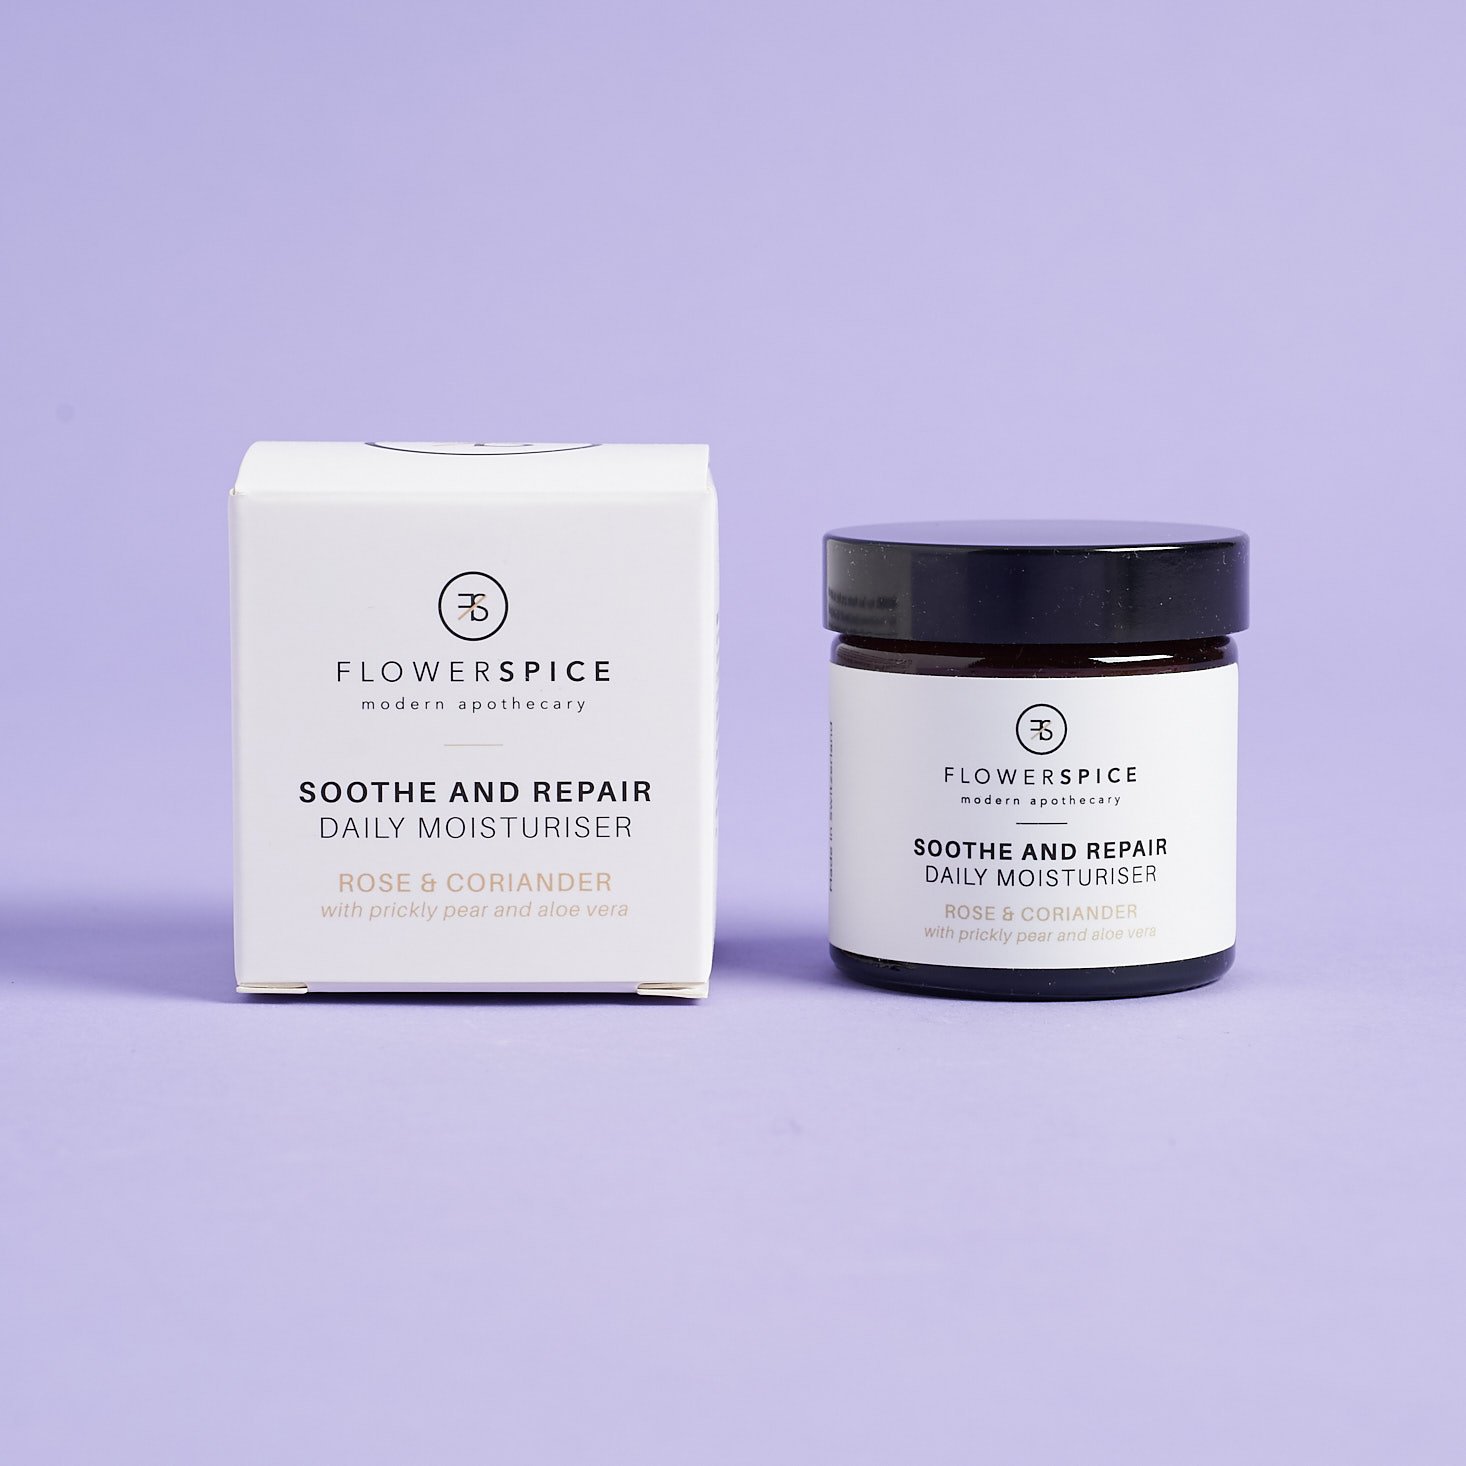 Flower and Spice Modern Apothecary Soothe and Repair Daily Moisturiser Rose and Coriander